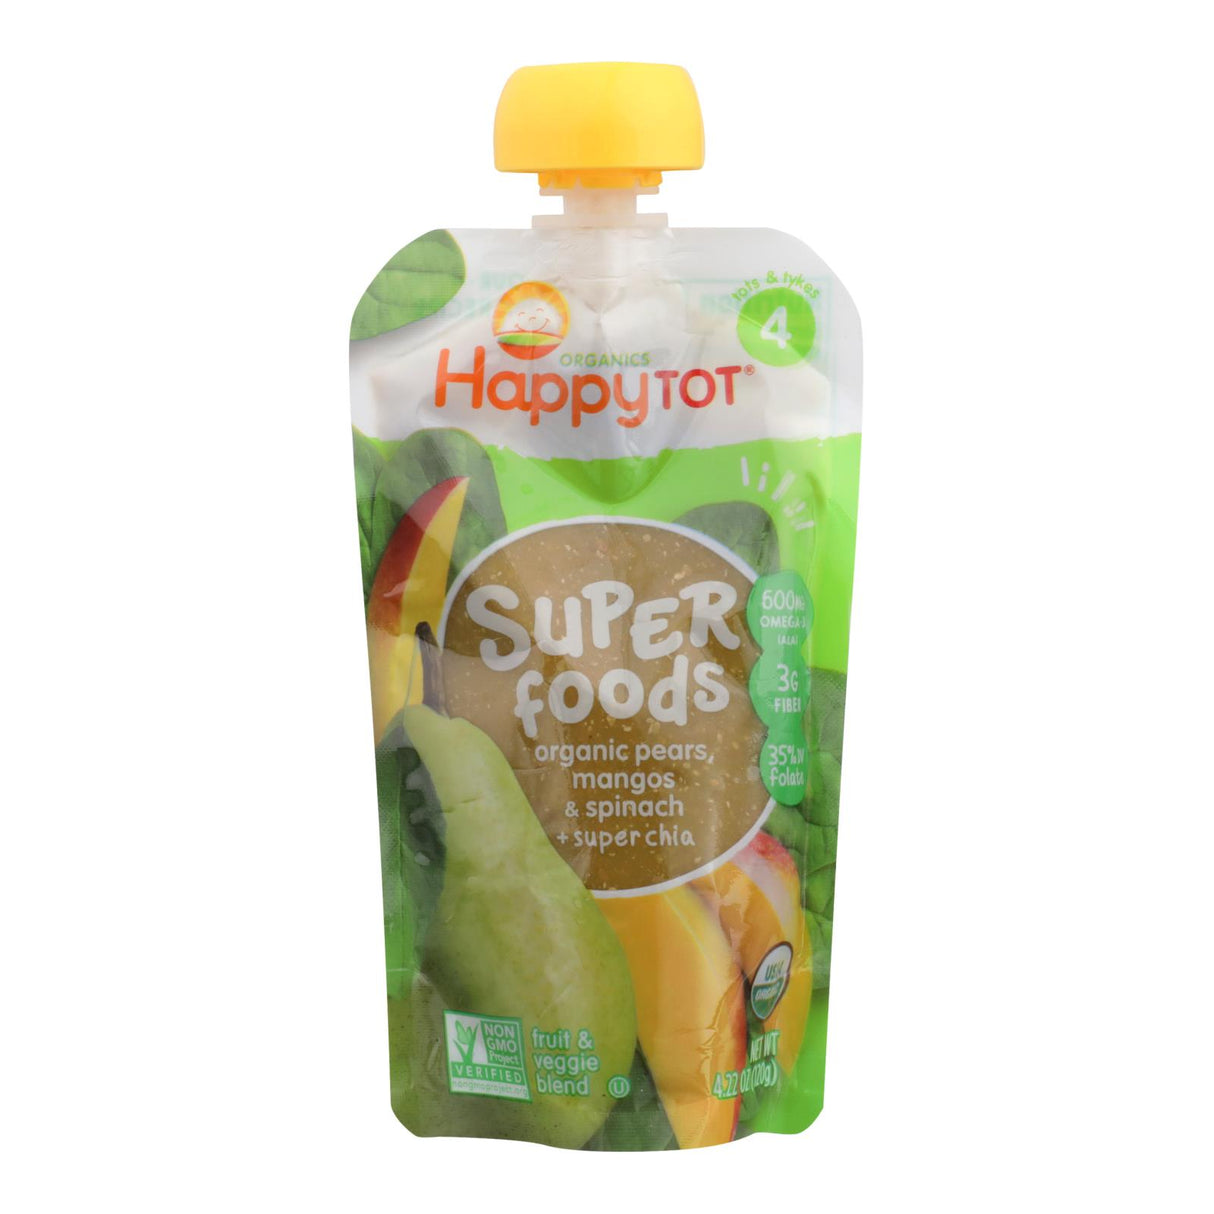 Organic Happy Baby Happytot Superfoods Spinach, Mango & Pear (Pack of 16 - 4.22 Oz) - Cozy Farm 